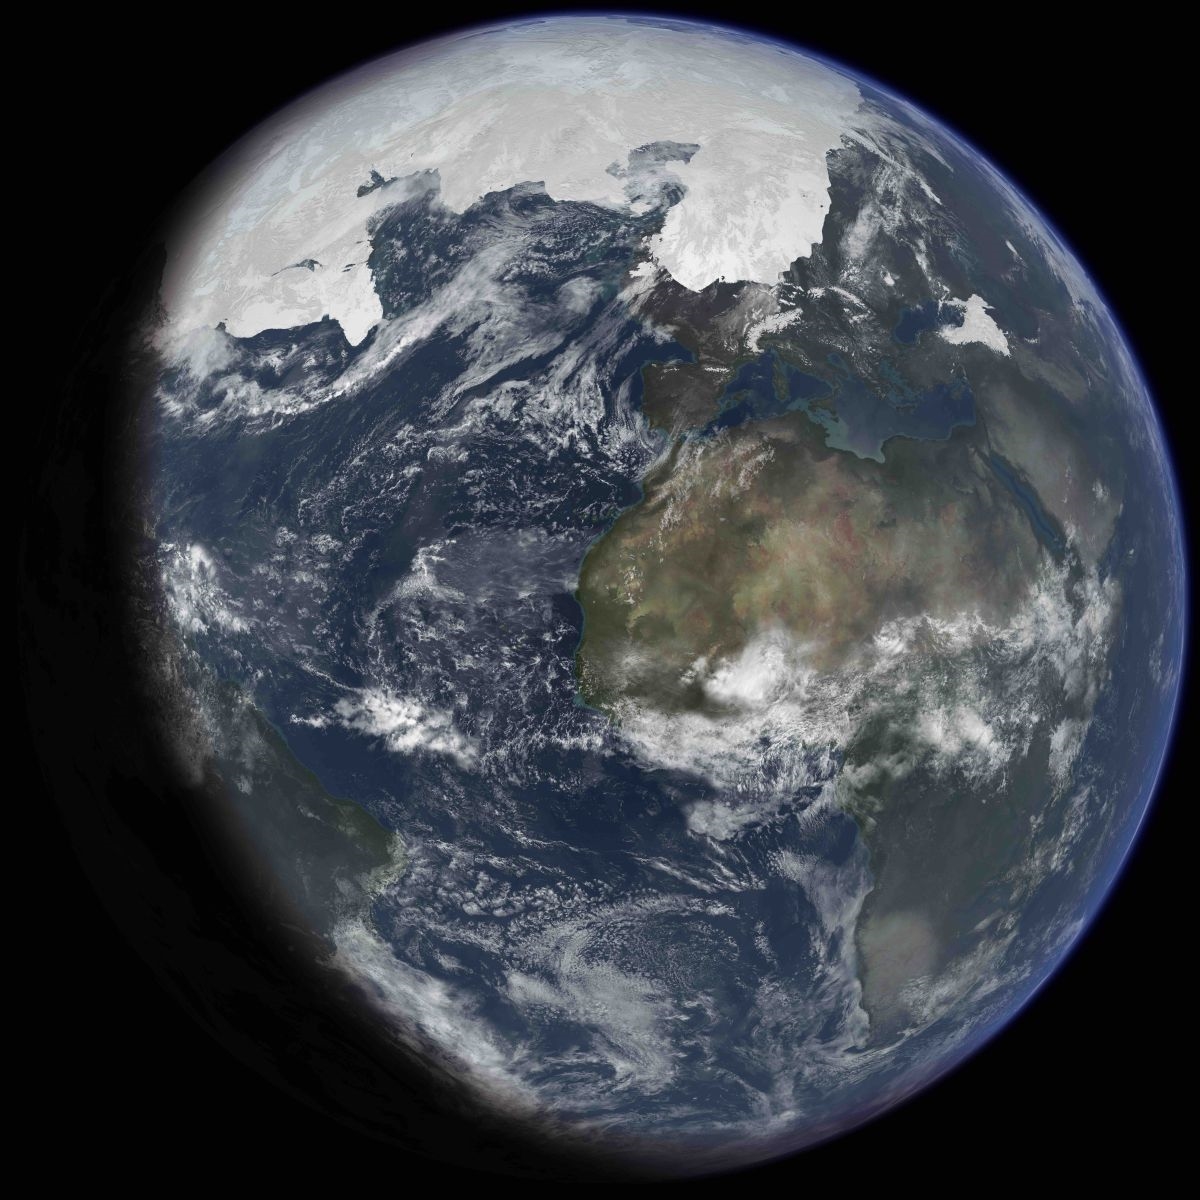 An artist's impression of ice age Earth at glacial maximum (based on: Crowley, T. J., 1995).